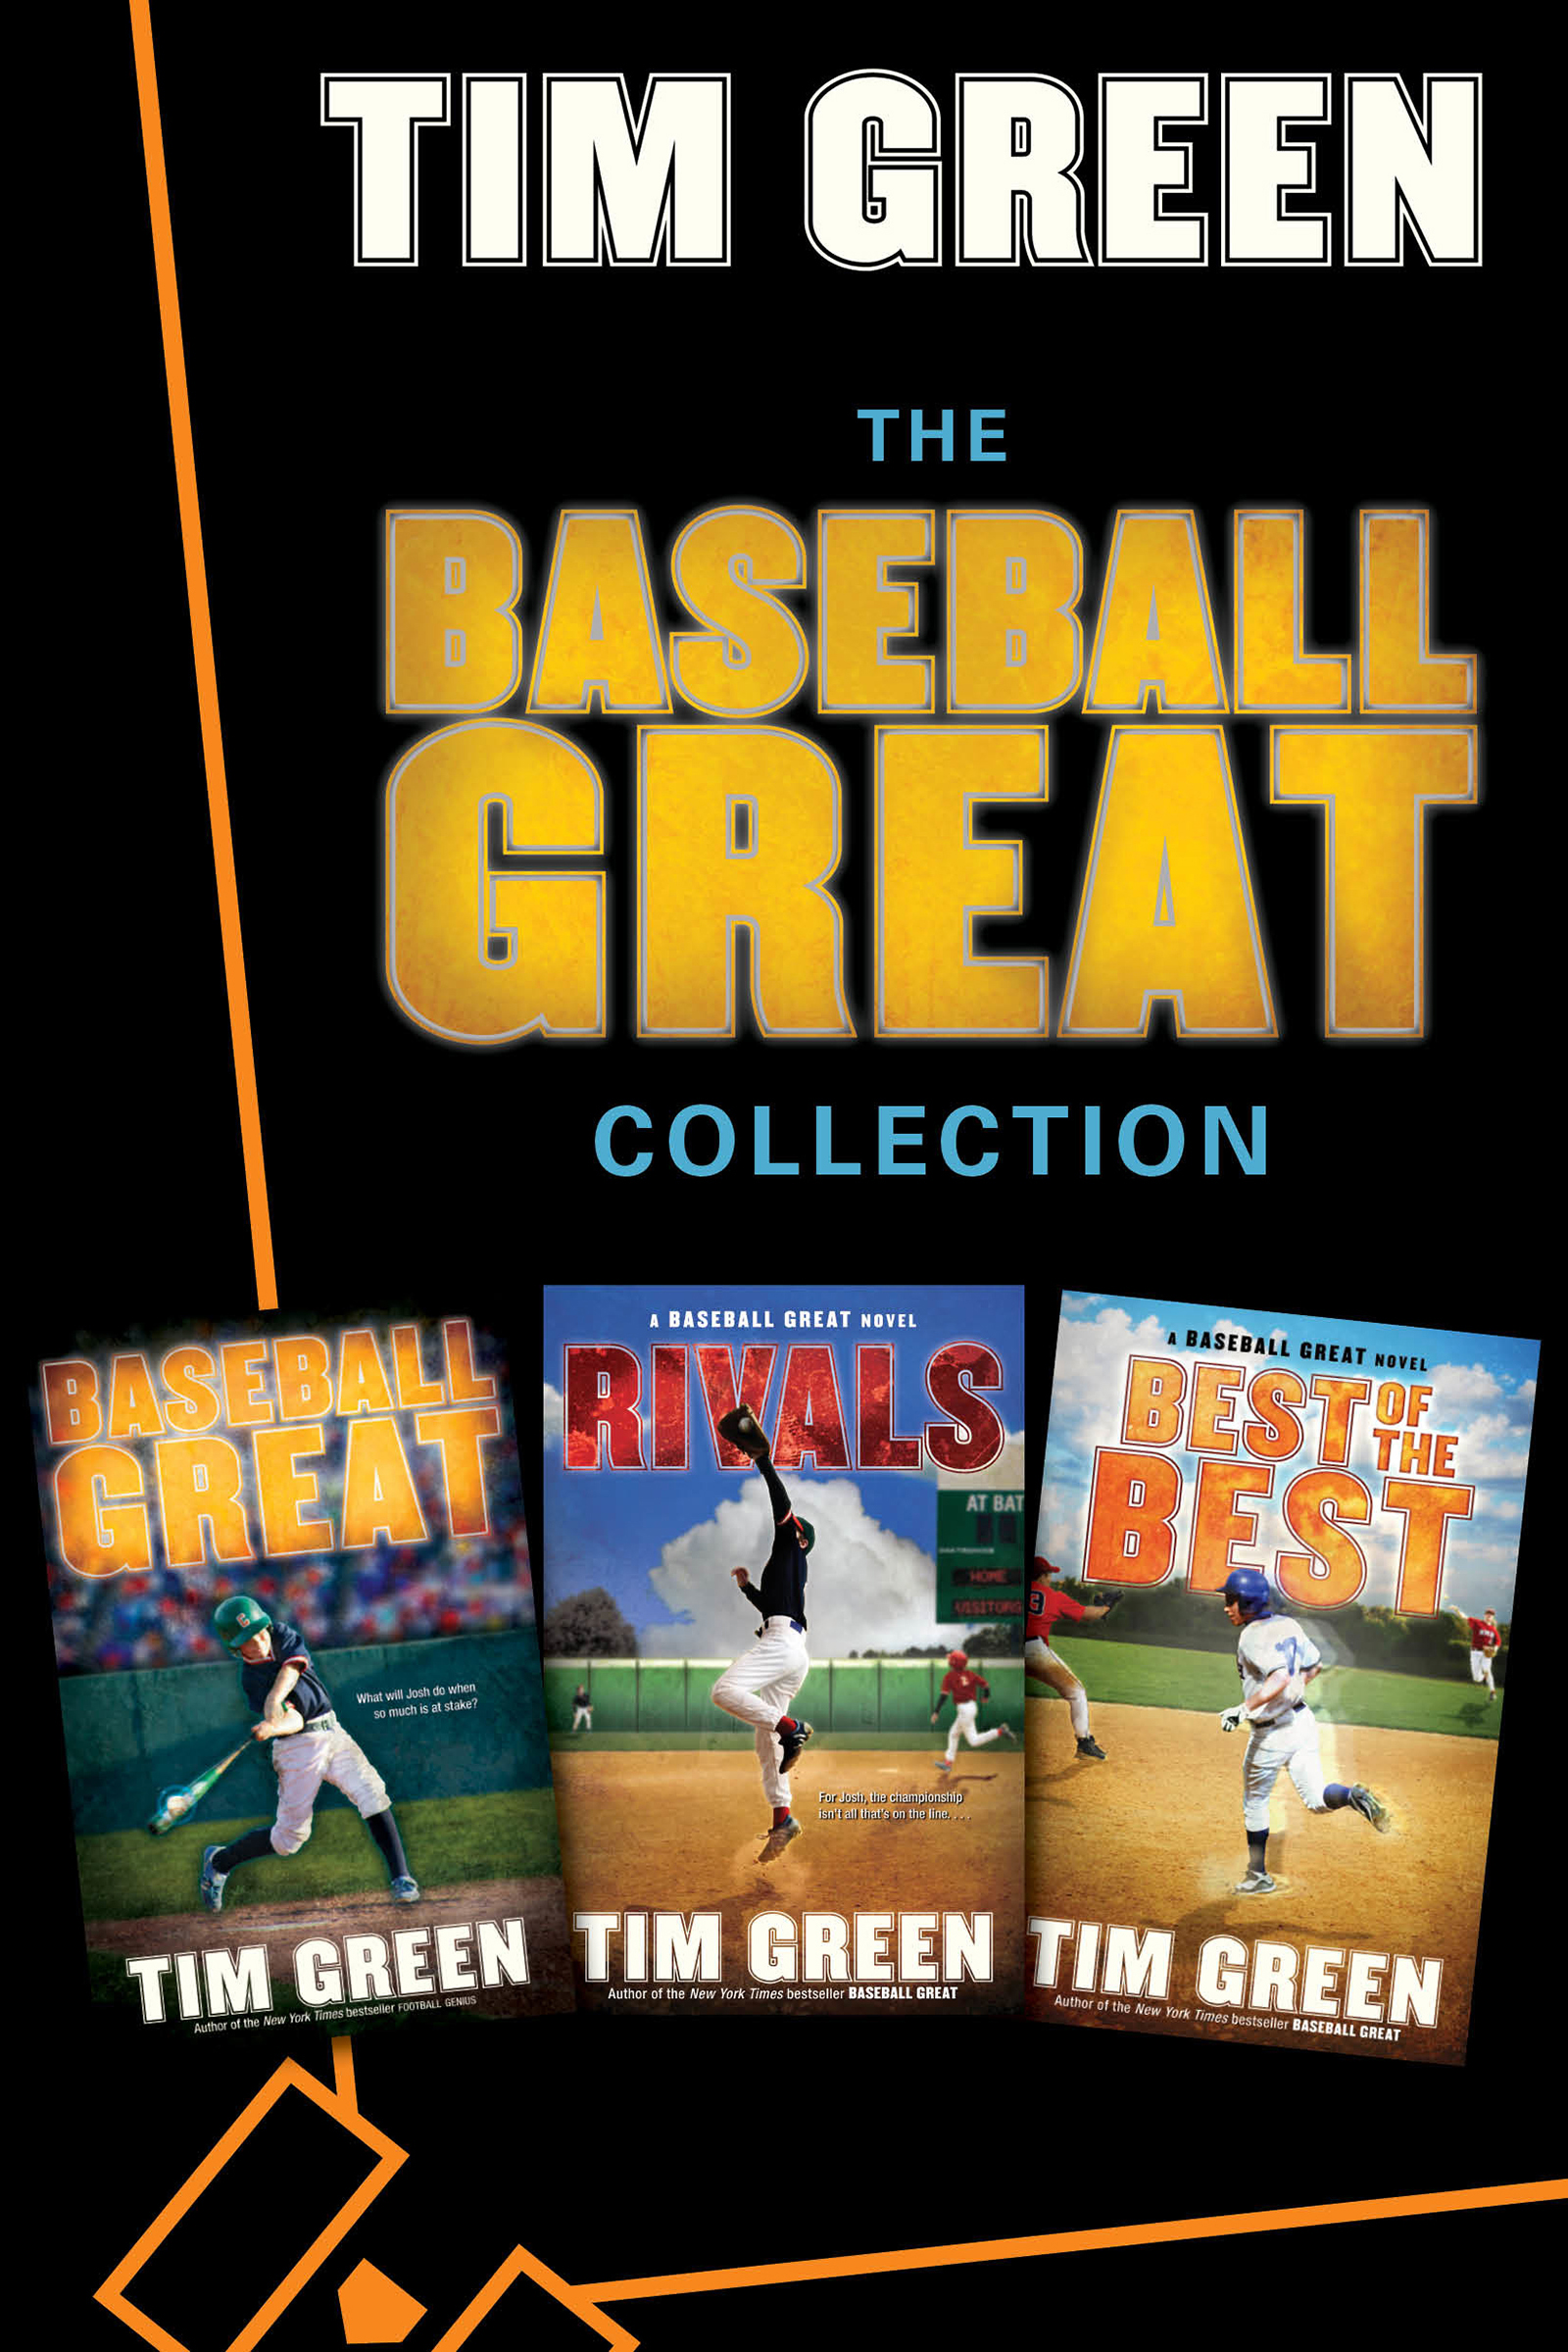 The baseball great collection baseball great, rivals, best of the best cover image